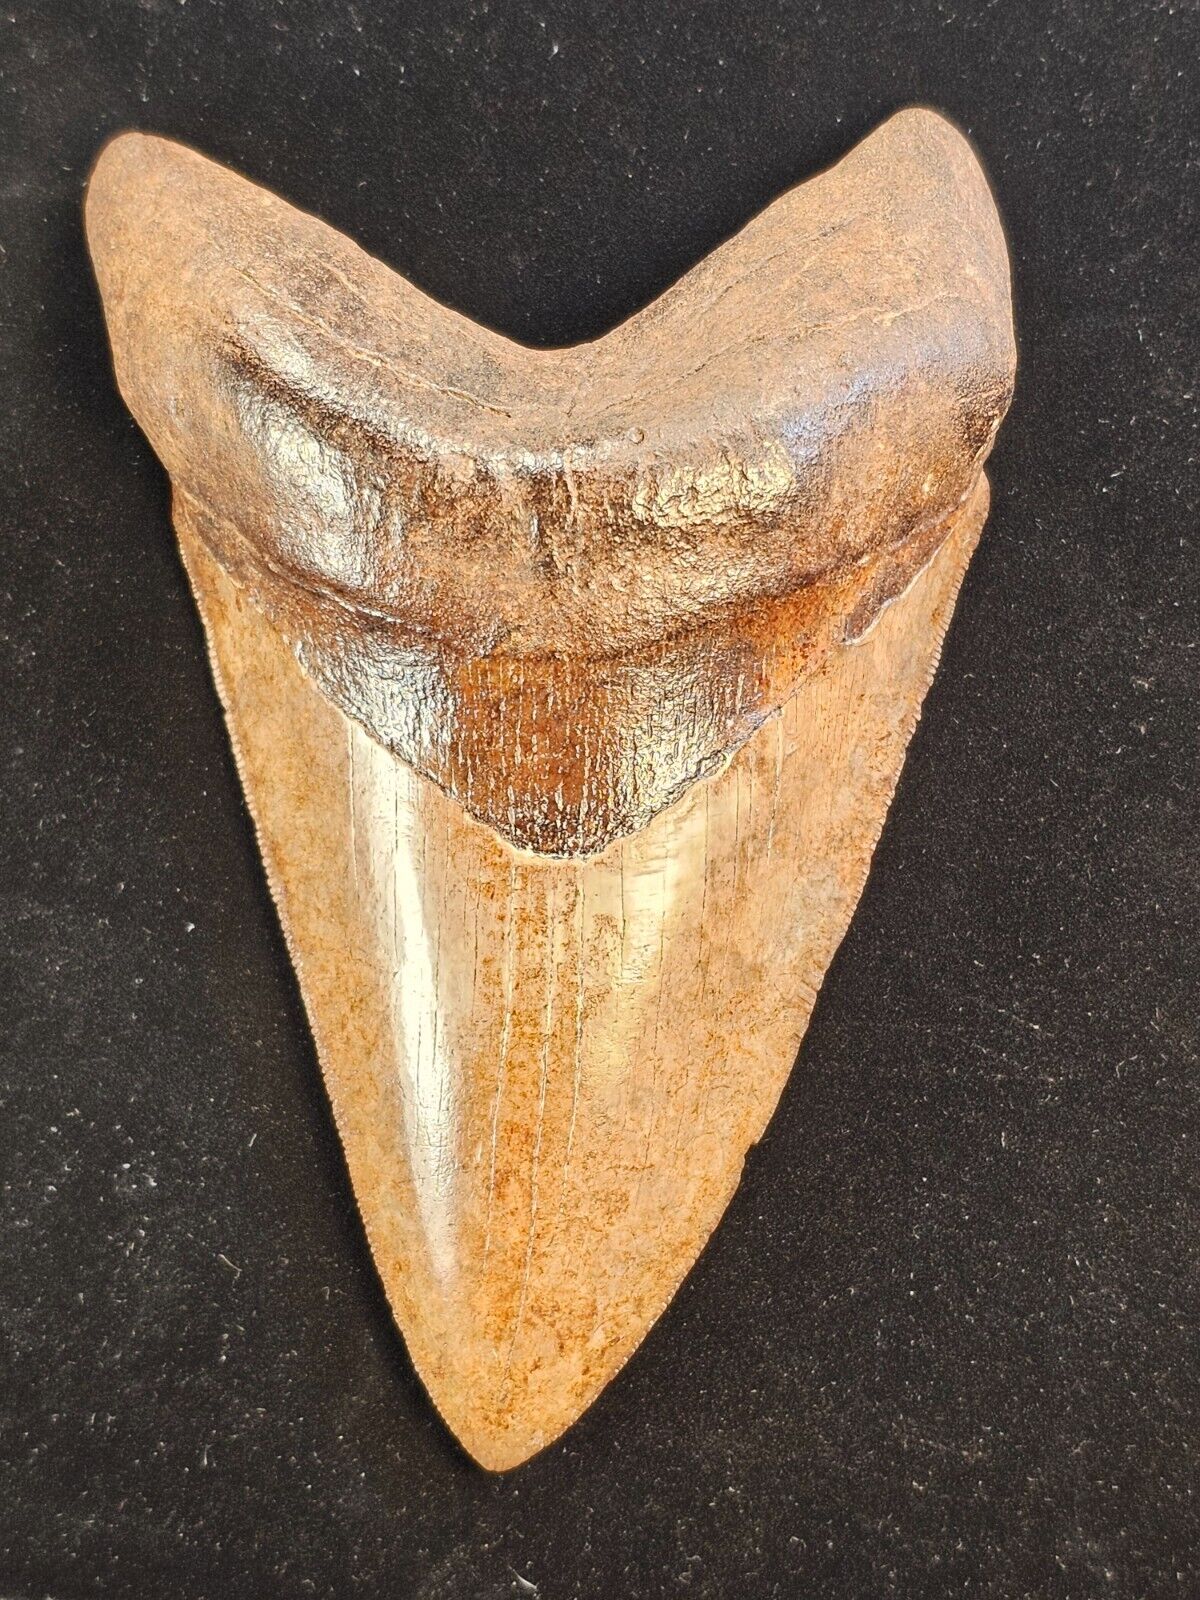 Huge 5.04 inch Collector Quality St Marys River Megalodon fossil tooth.